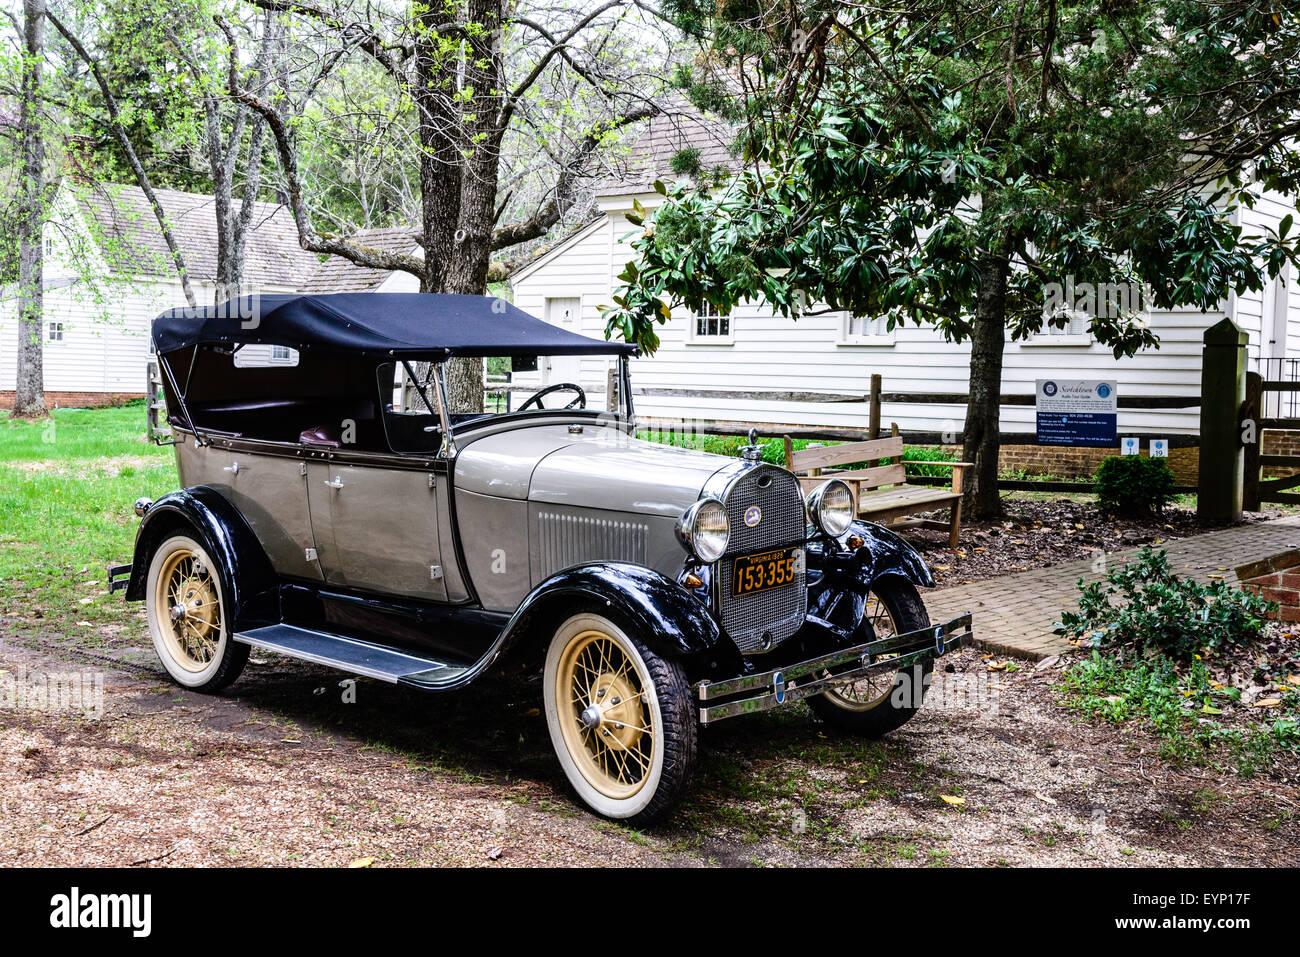 1928 4-door Model A Ford outside Patrick Henry's Scotchtown, Chiswell Lane, Beaverdam, Virginia Stock Photo